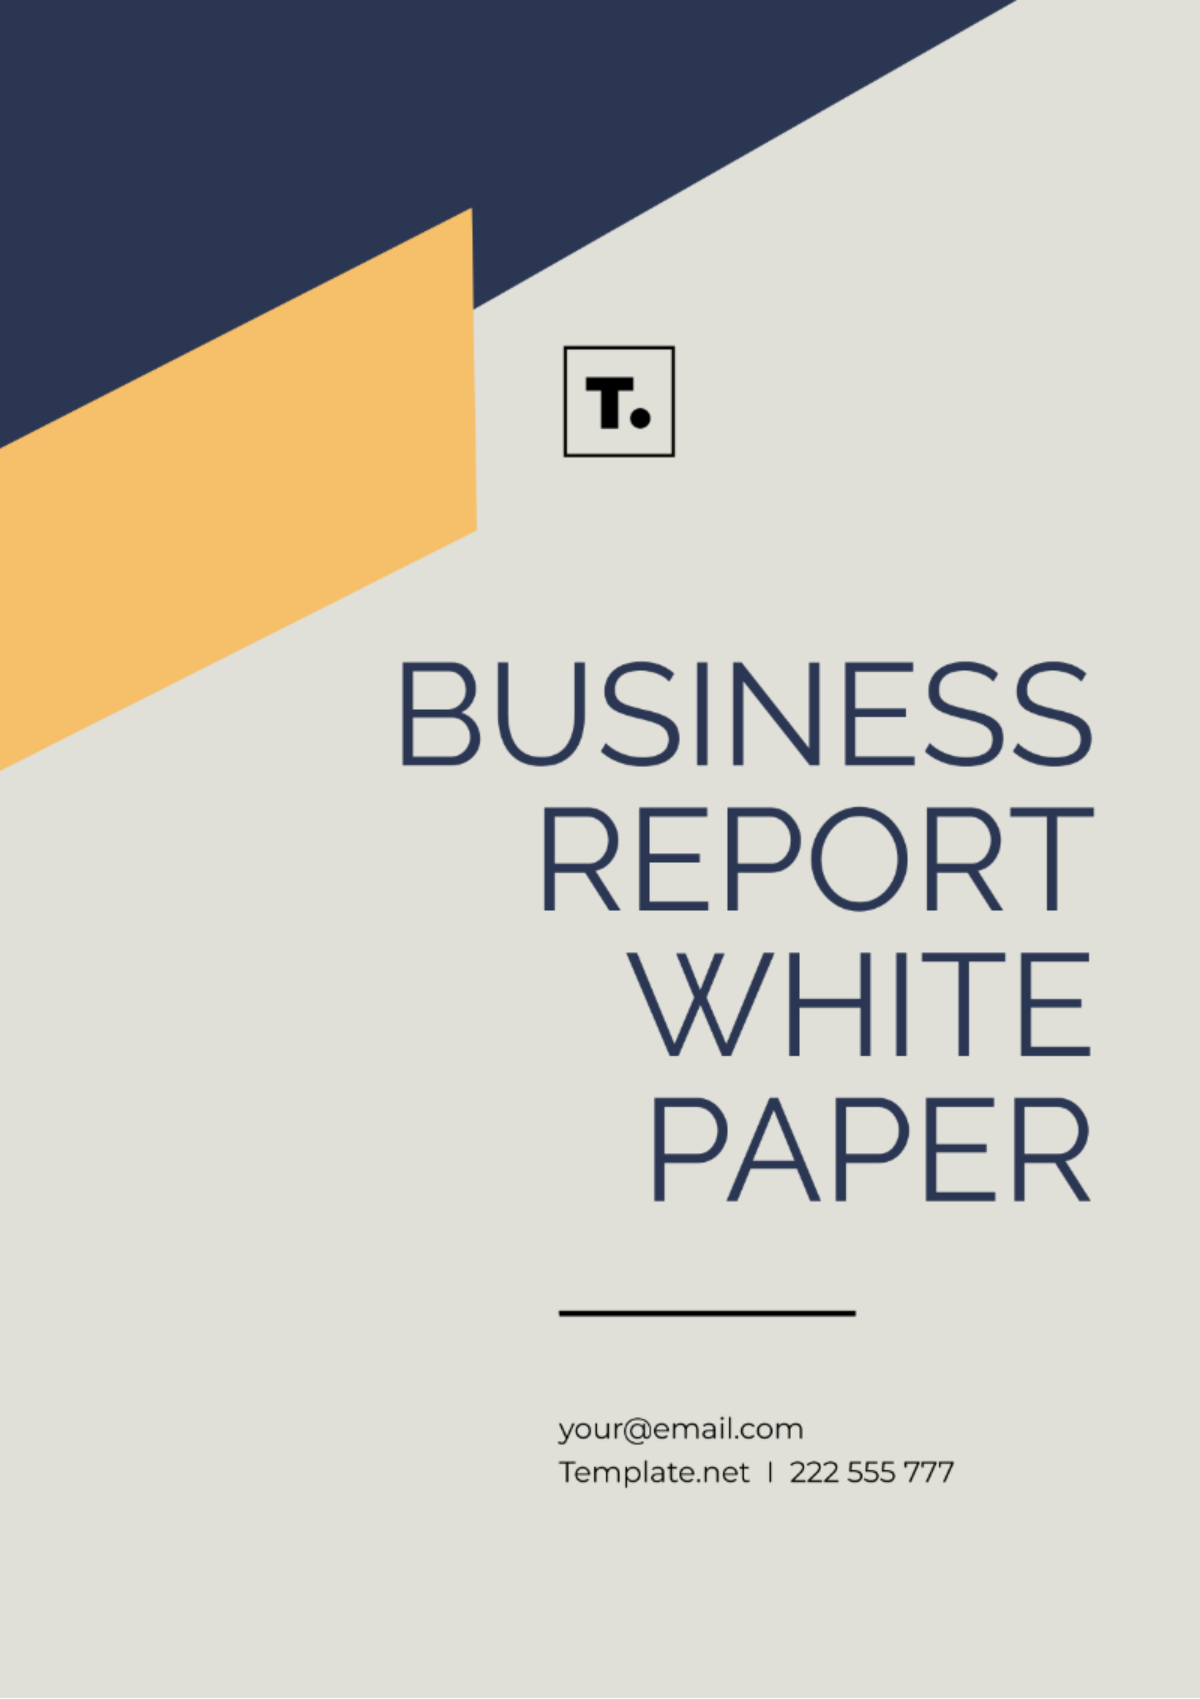 Business Report White Paper Template